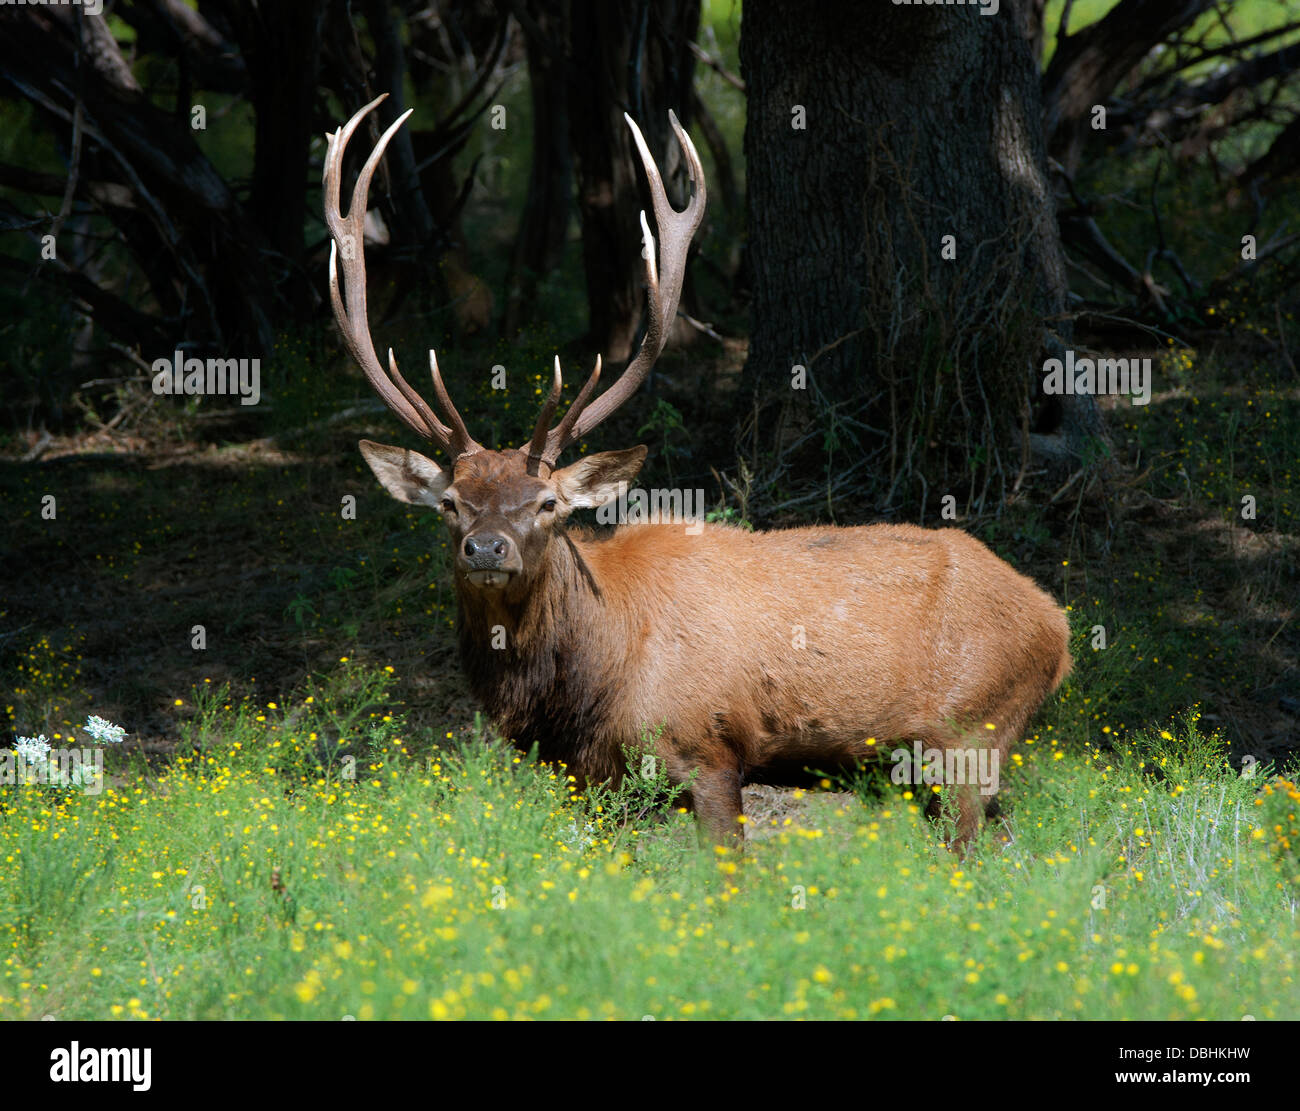 Large male deer in a field of wildflowers near a dark wooded area. Stock Photo